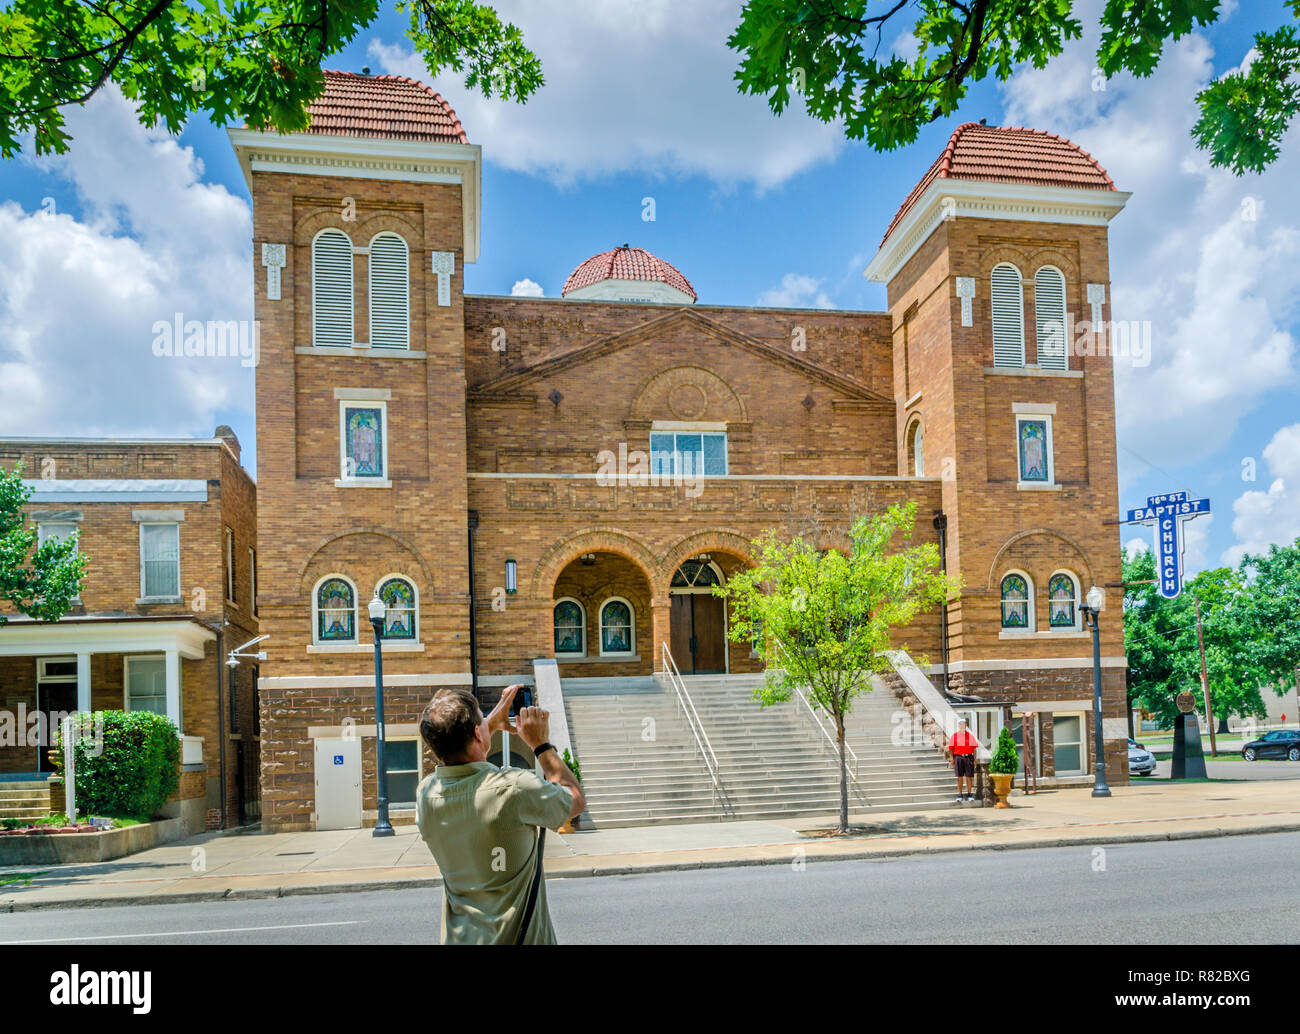 A tourist takes a photograph of 16th St. Baptist Church, July 12, 2015, in Birmingham, Alabama. Stock Photo